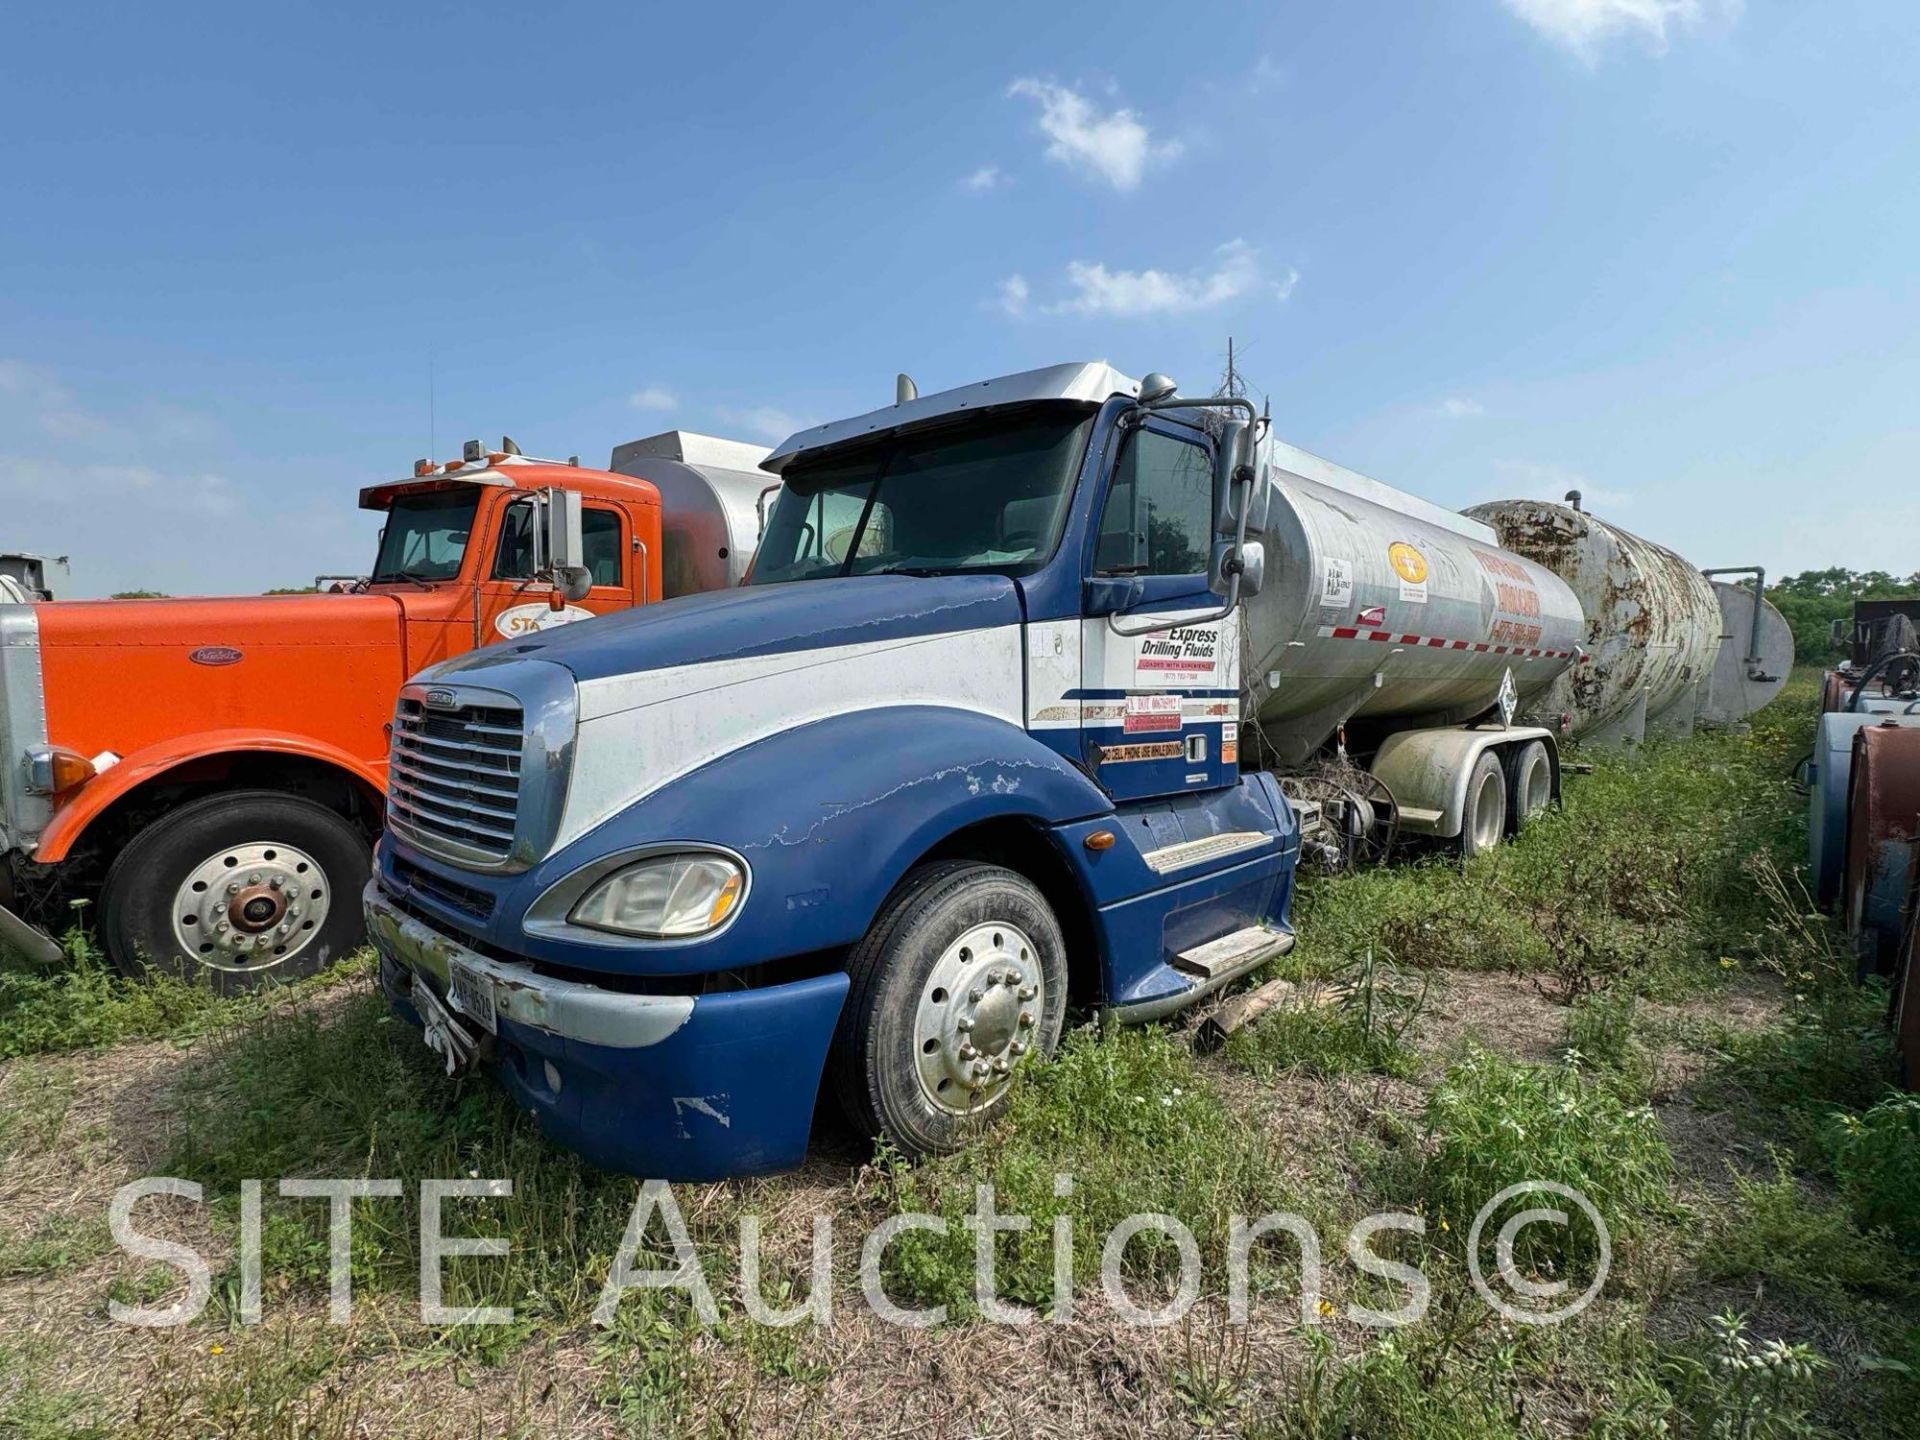 2005 Freightliner Columbia T/A Fuel Truck - Image 2 of 32